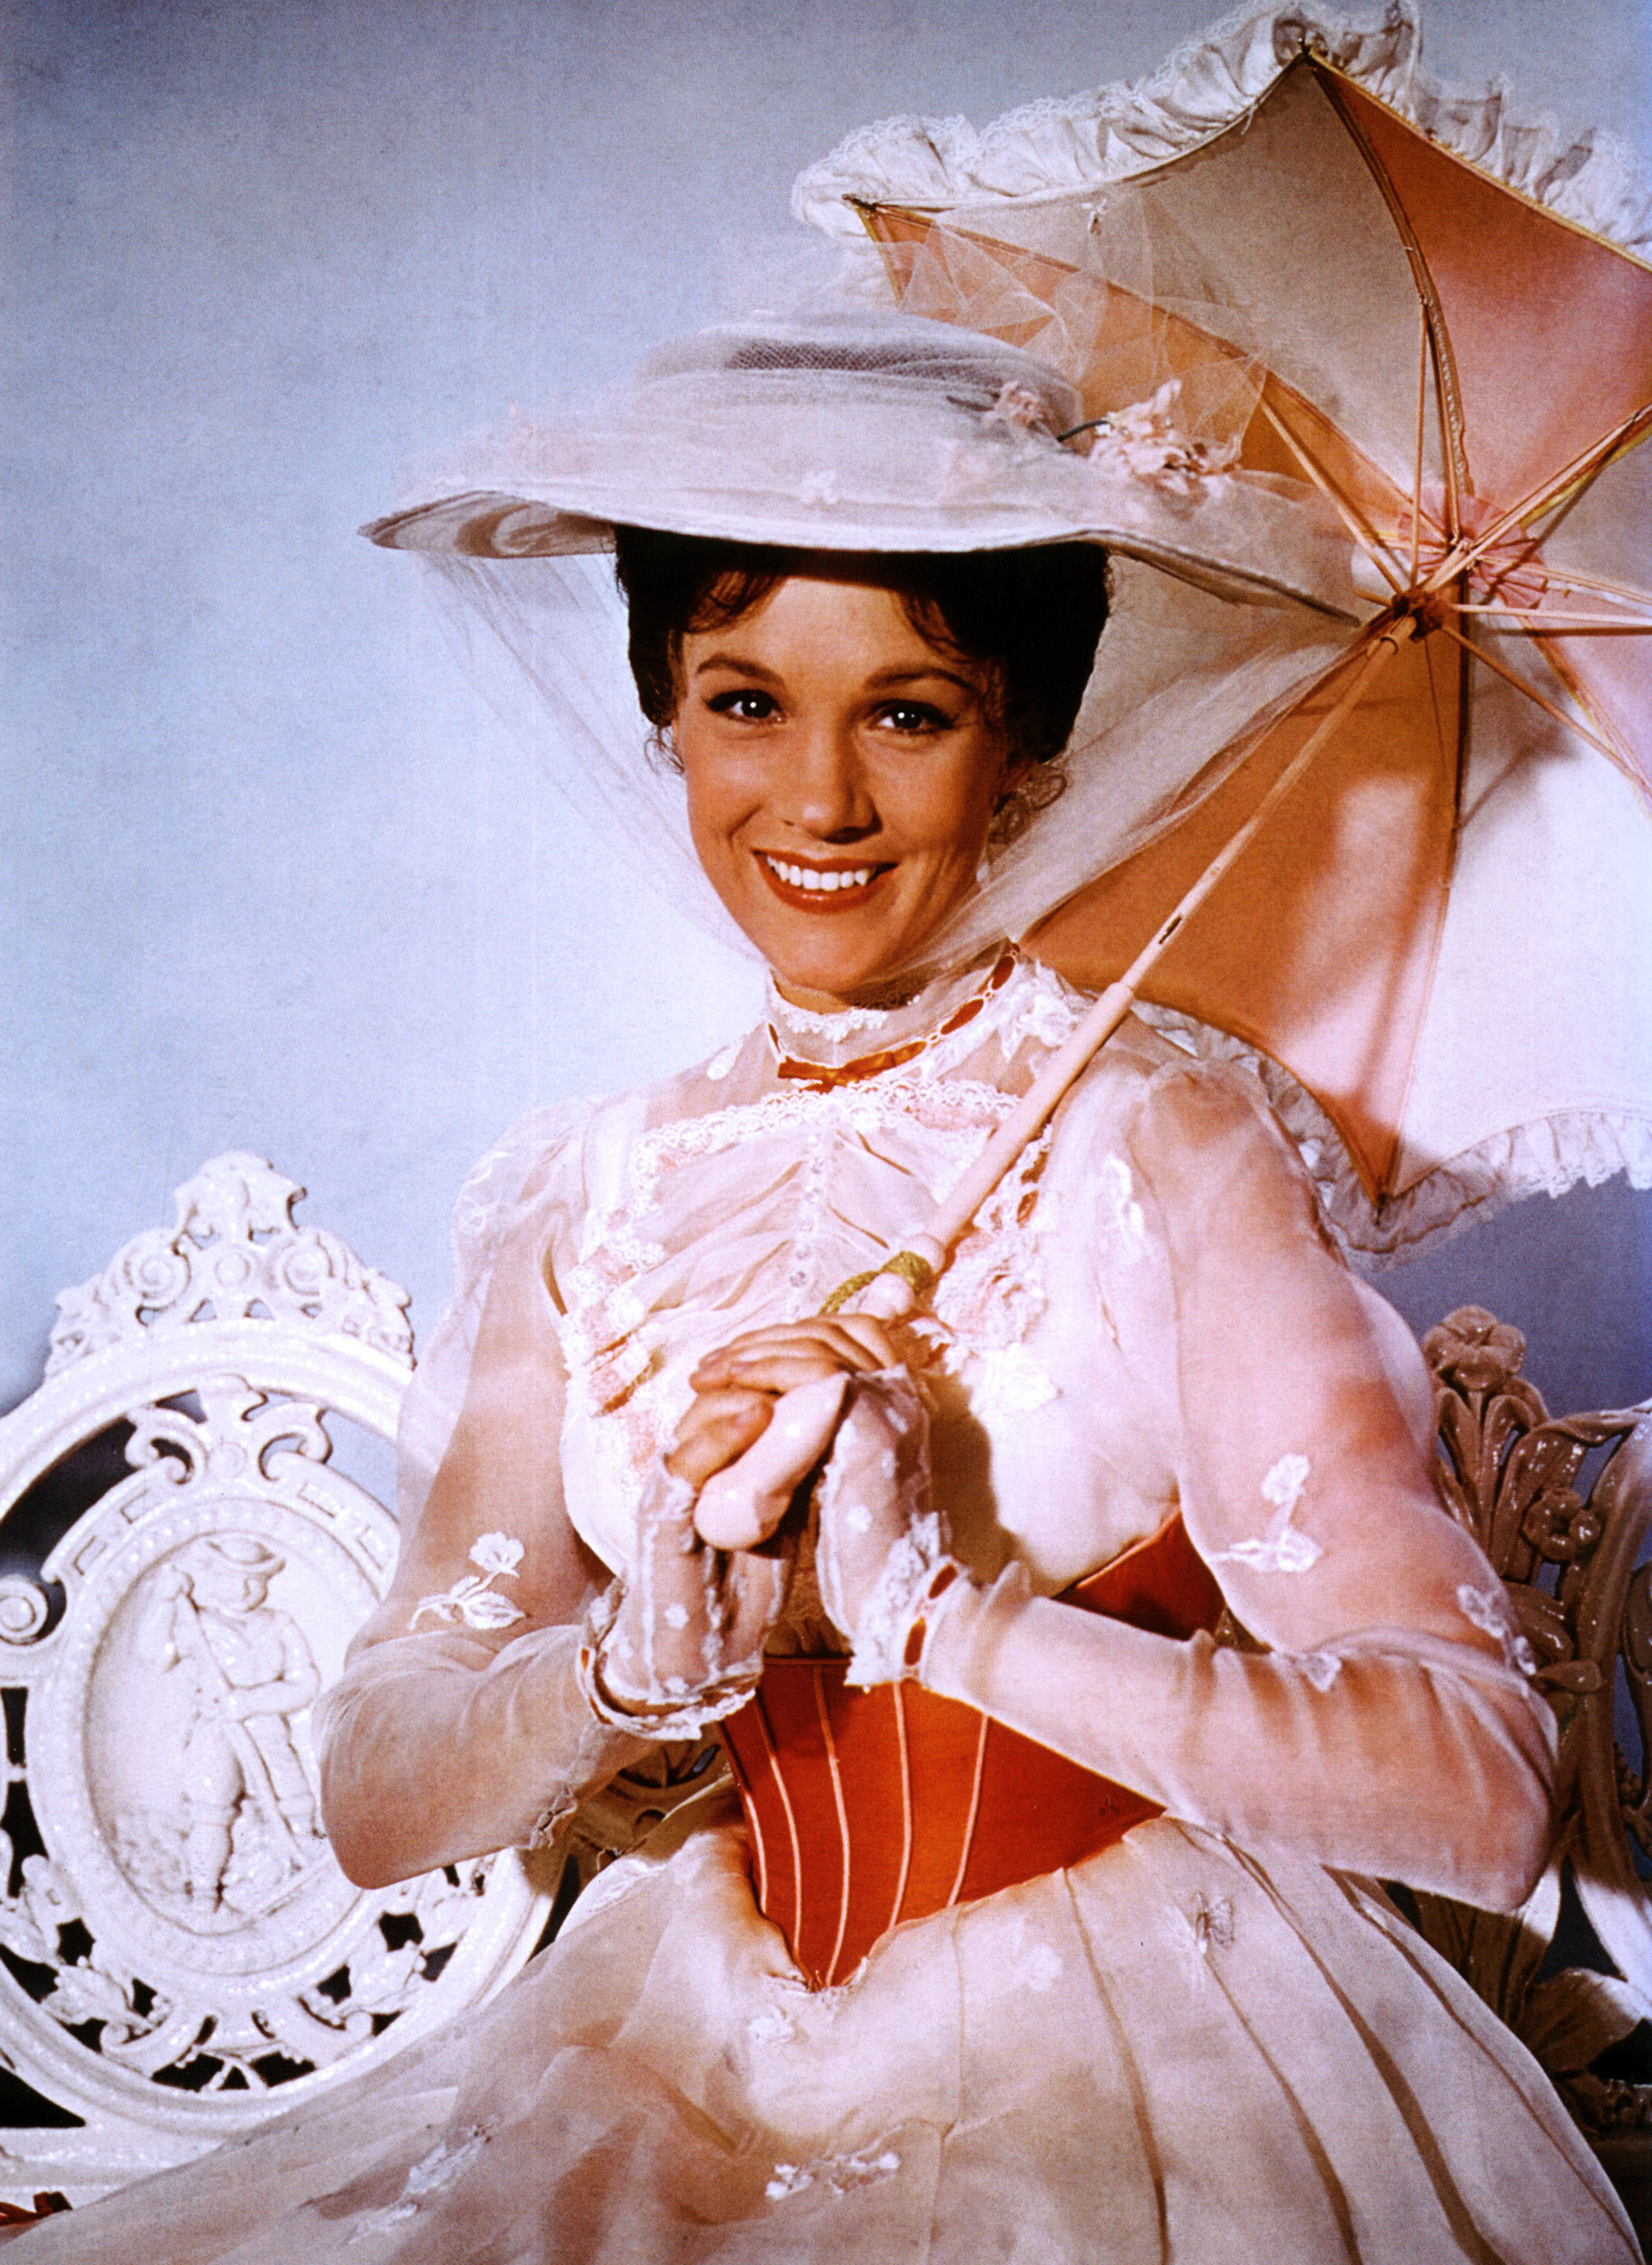 Mary Poppins Movie Musical in the Works at Disney